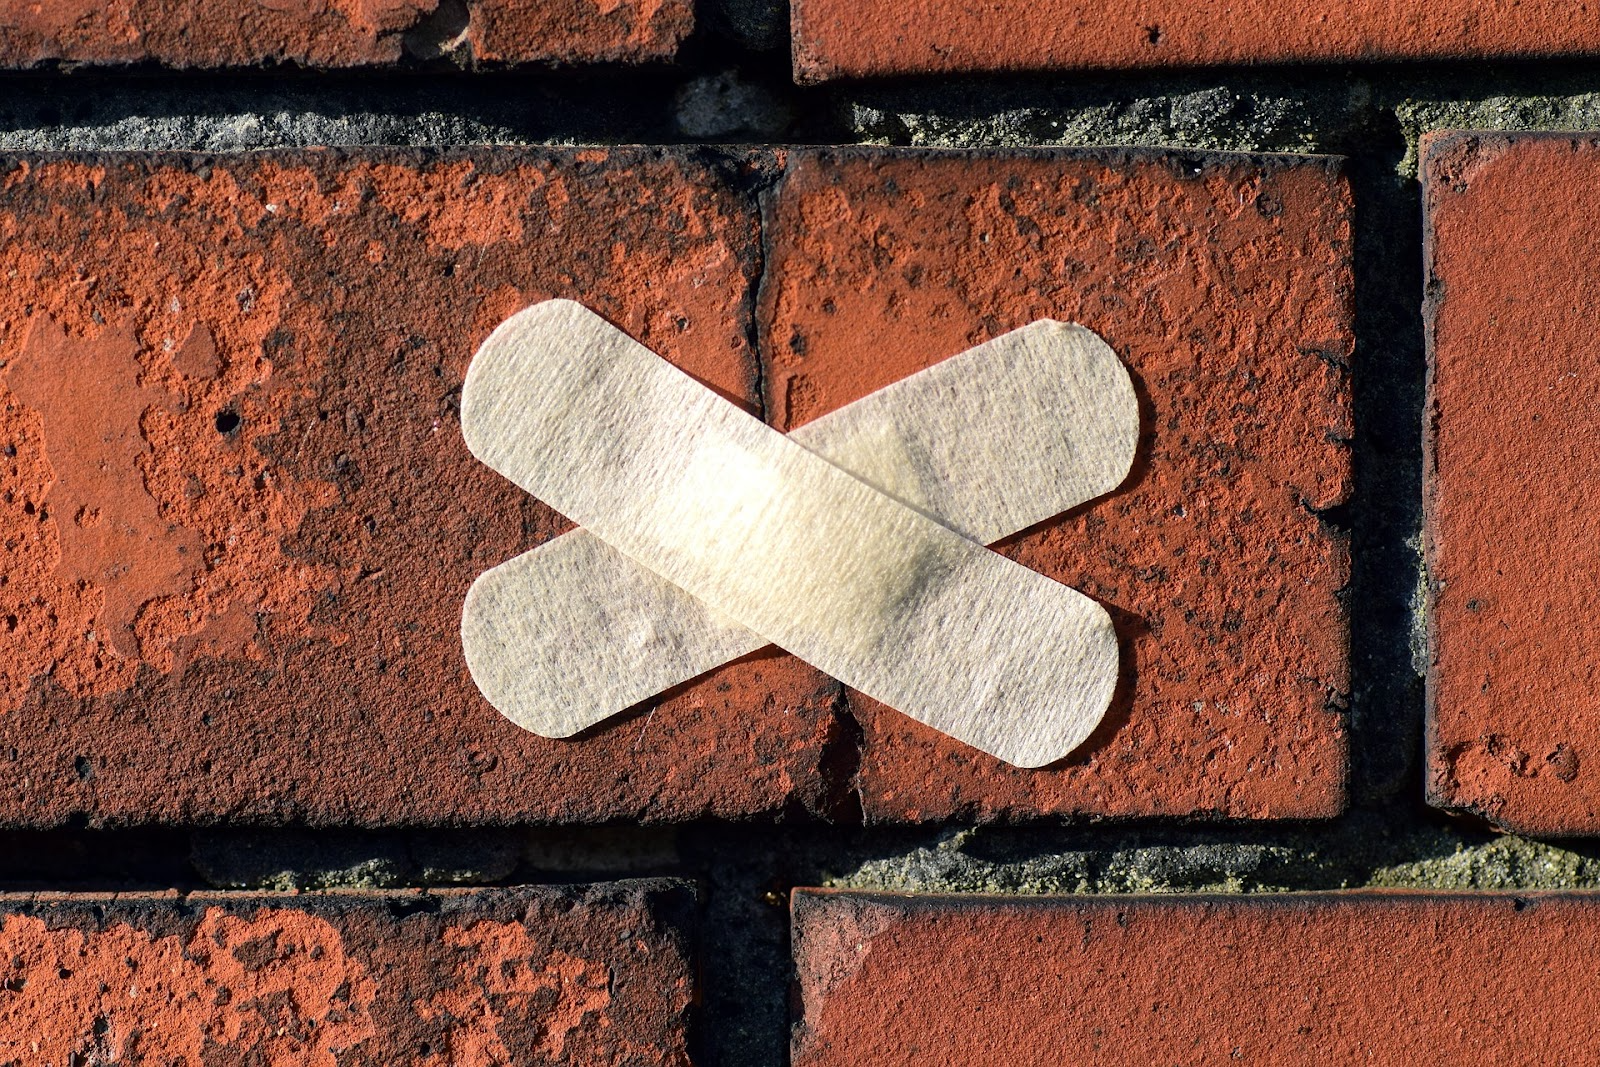 a plaster covering up cracks in a red brick wall